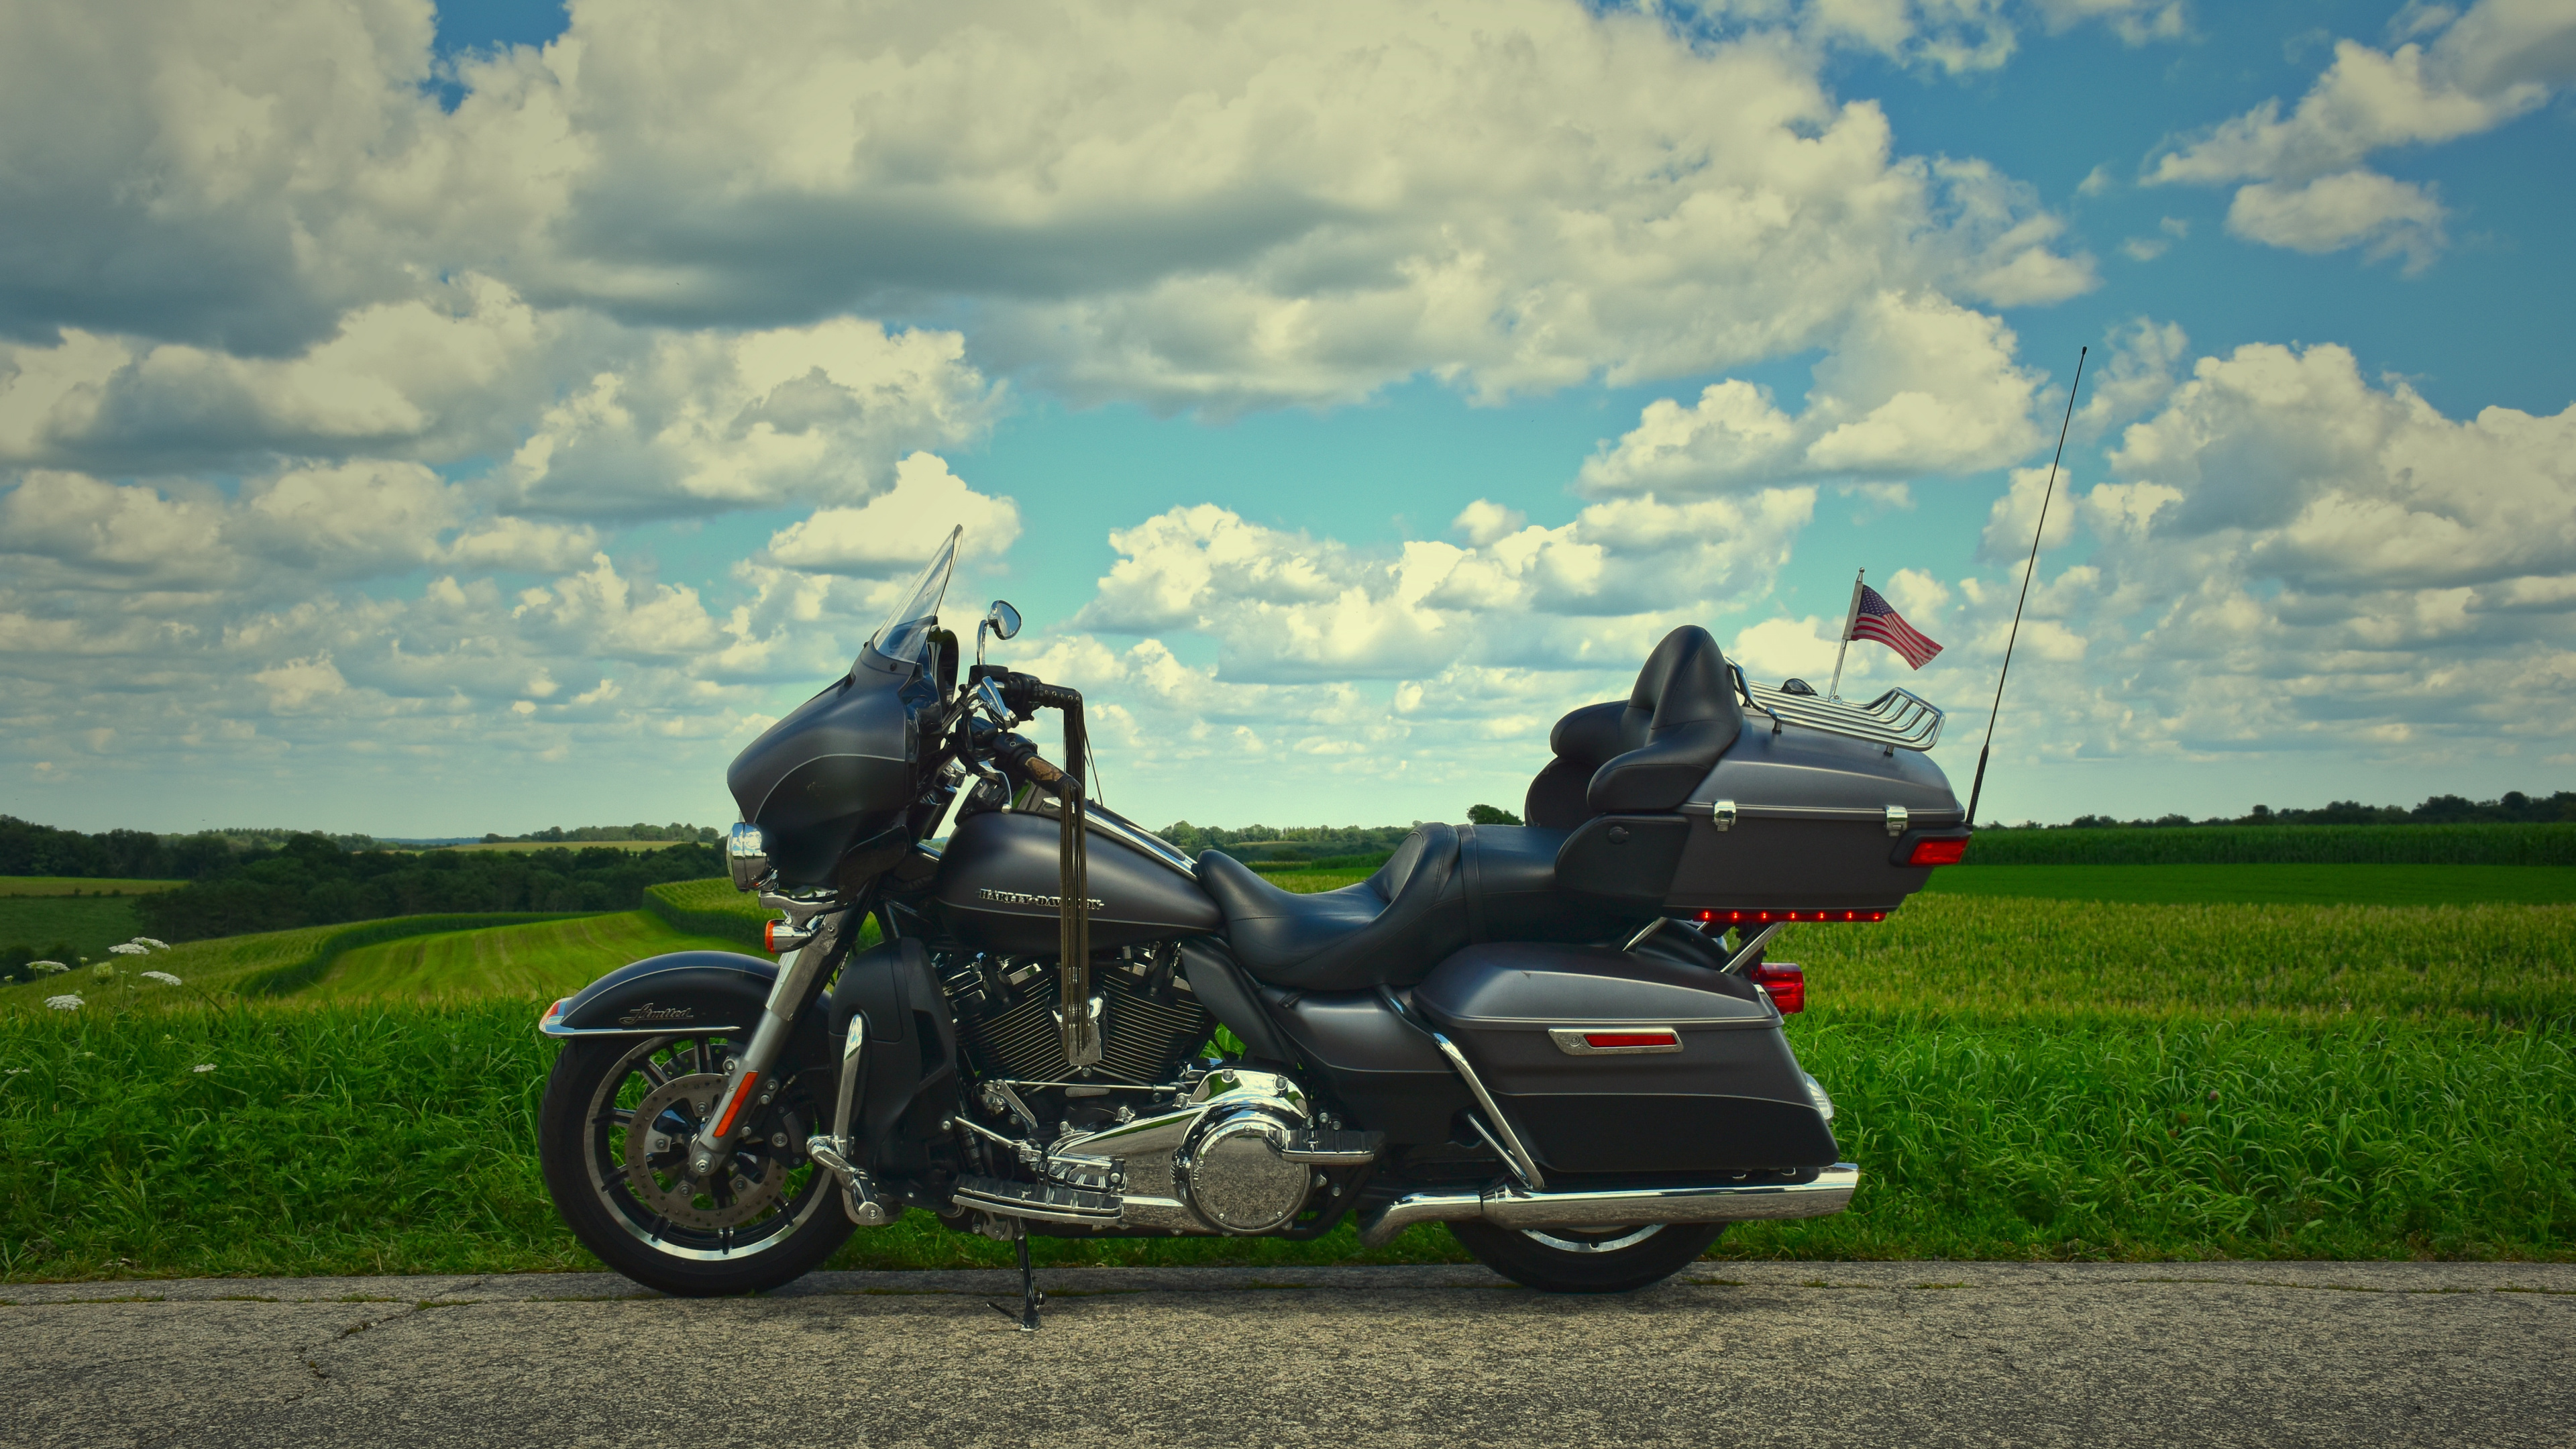 Black and White Sports Bike on Green Grass Field Under White Clouds and Blue Sky During. Wallpaper in 3840x2160 Resolution